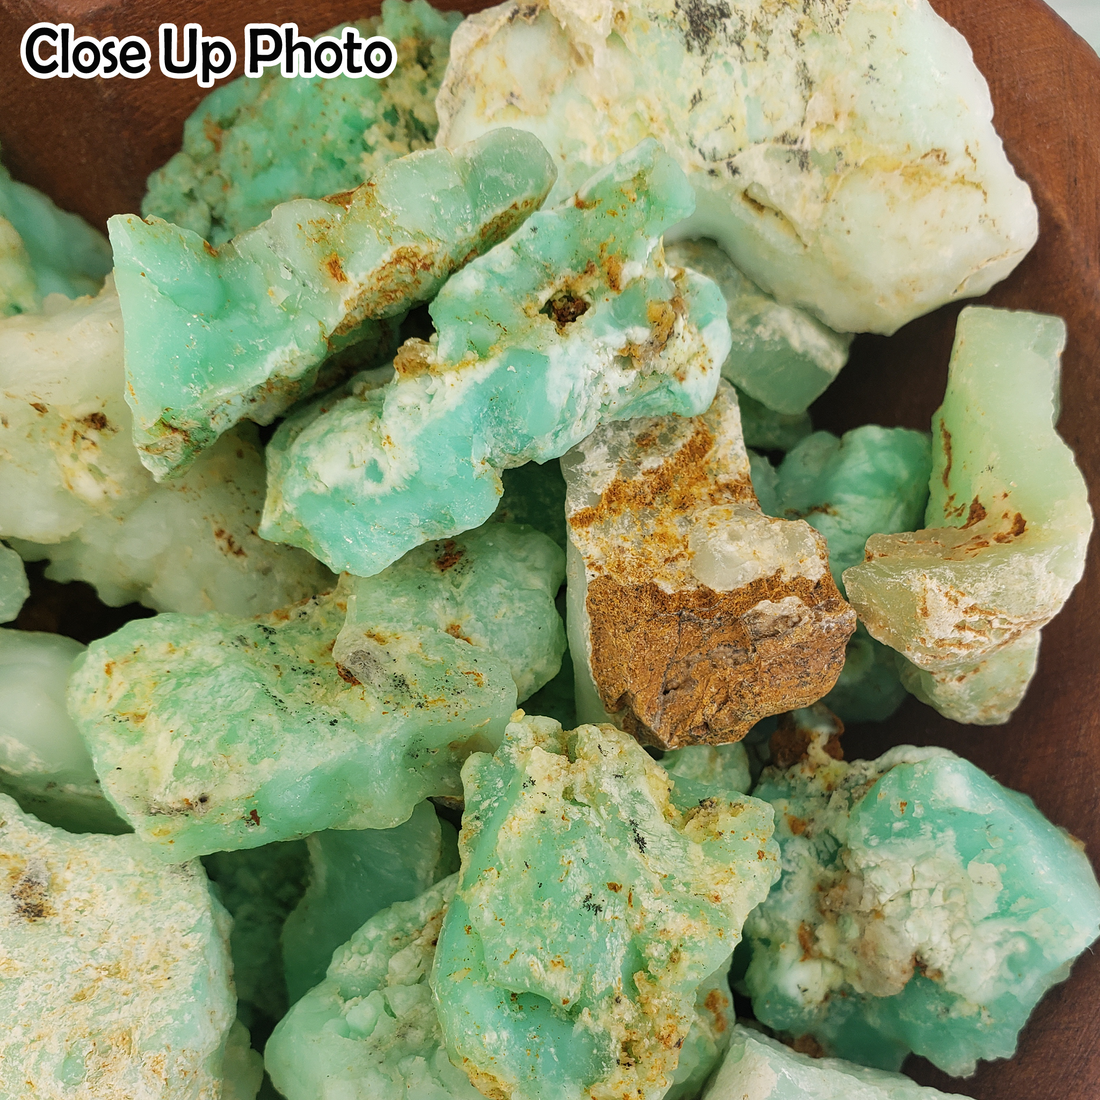 Chrysoprase Natural Raw Crystal Rough Gemstone - High Quality Small - Close Up 3